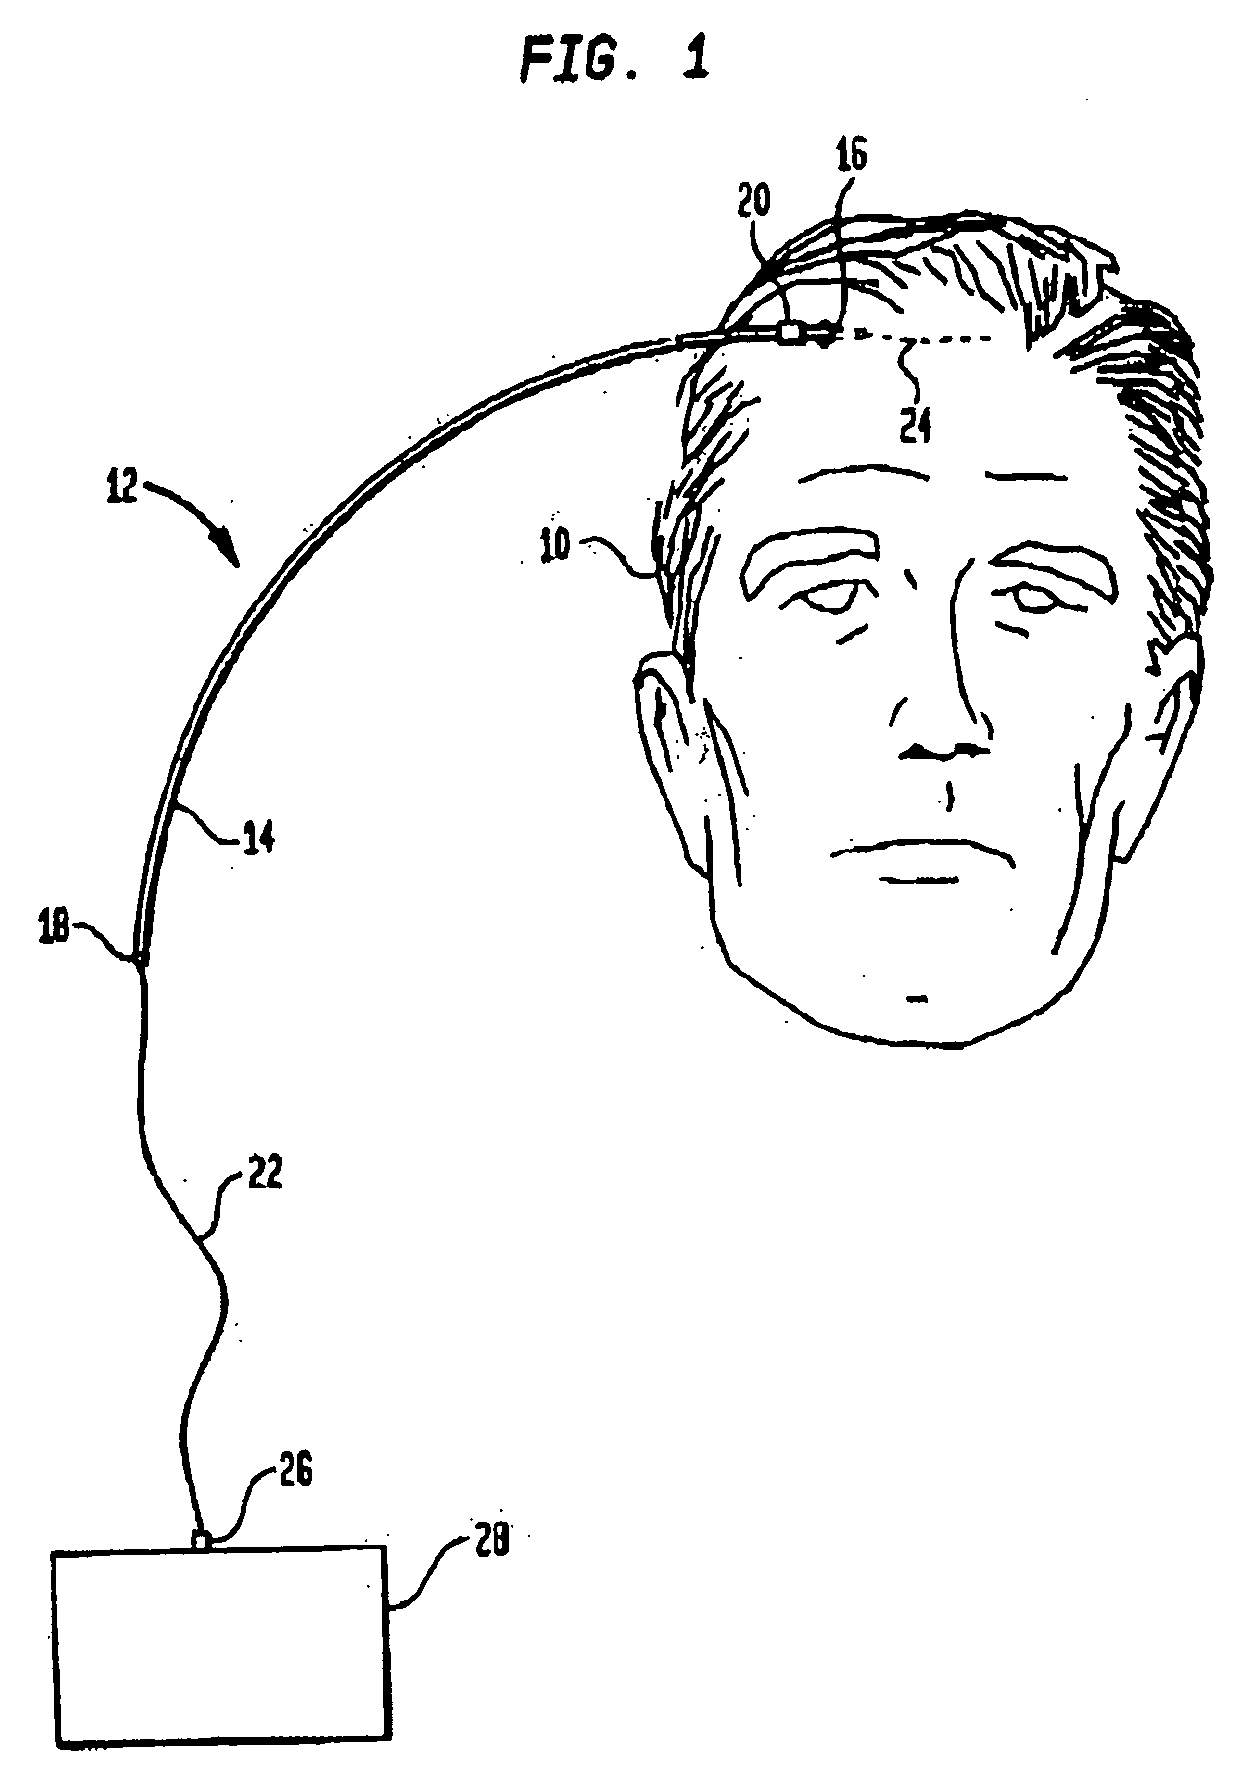 Infusion device and method for infusing material into the brain of a patient